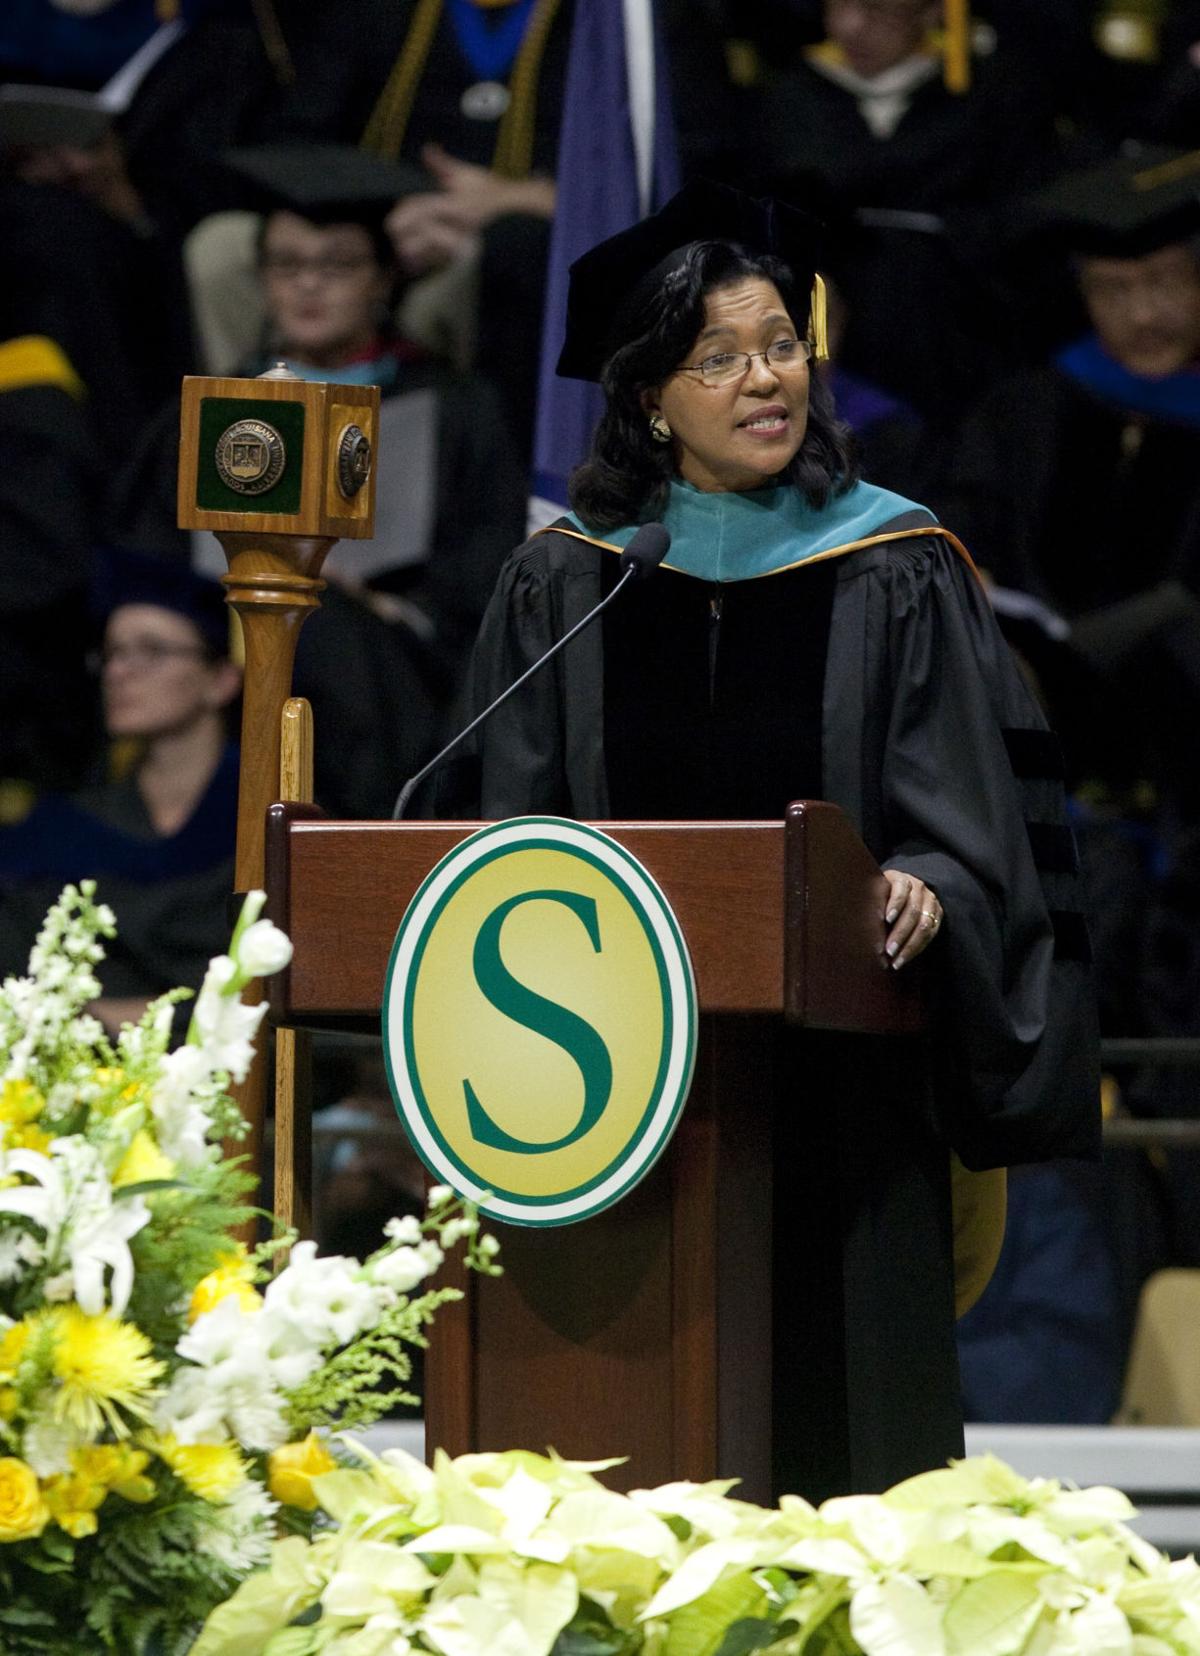 SLU confers degrees on more than 1,000 in December 2018 commencement